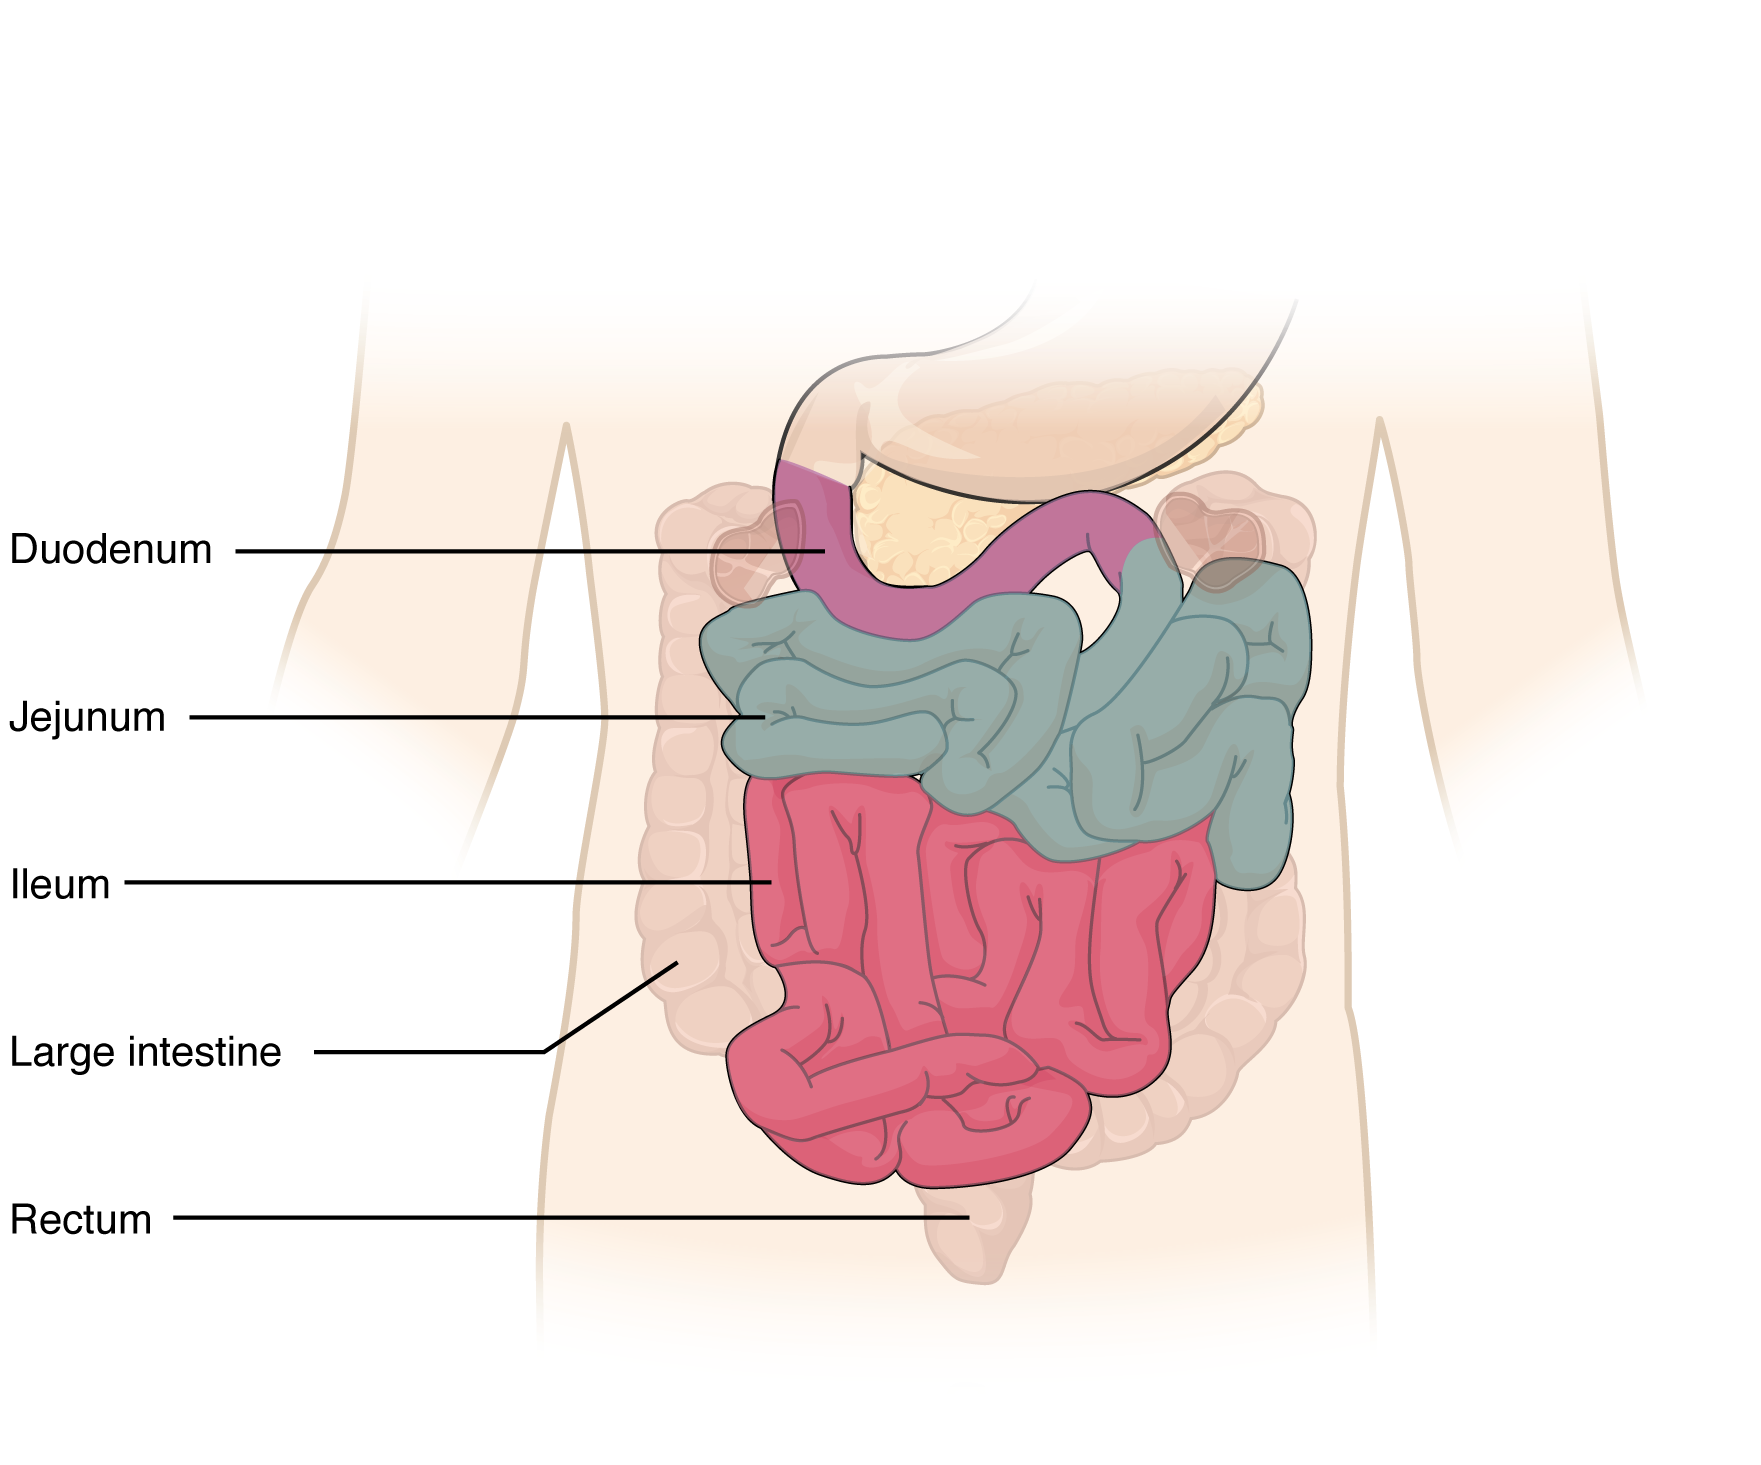 This diagram shows the small intestine. The different parts of the small intestine are labeled.